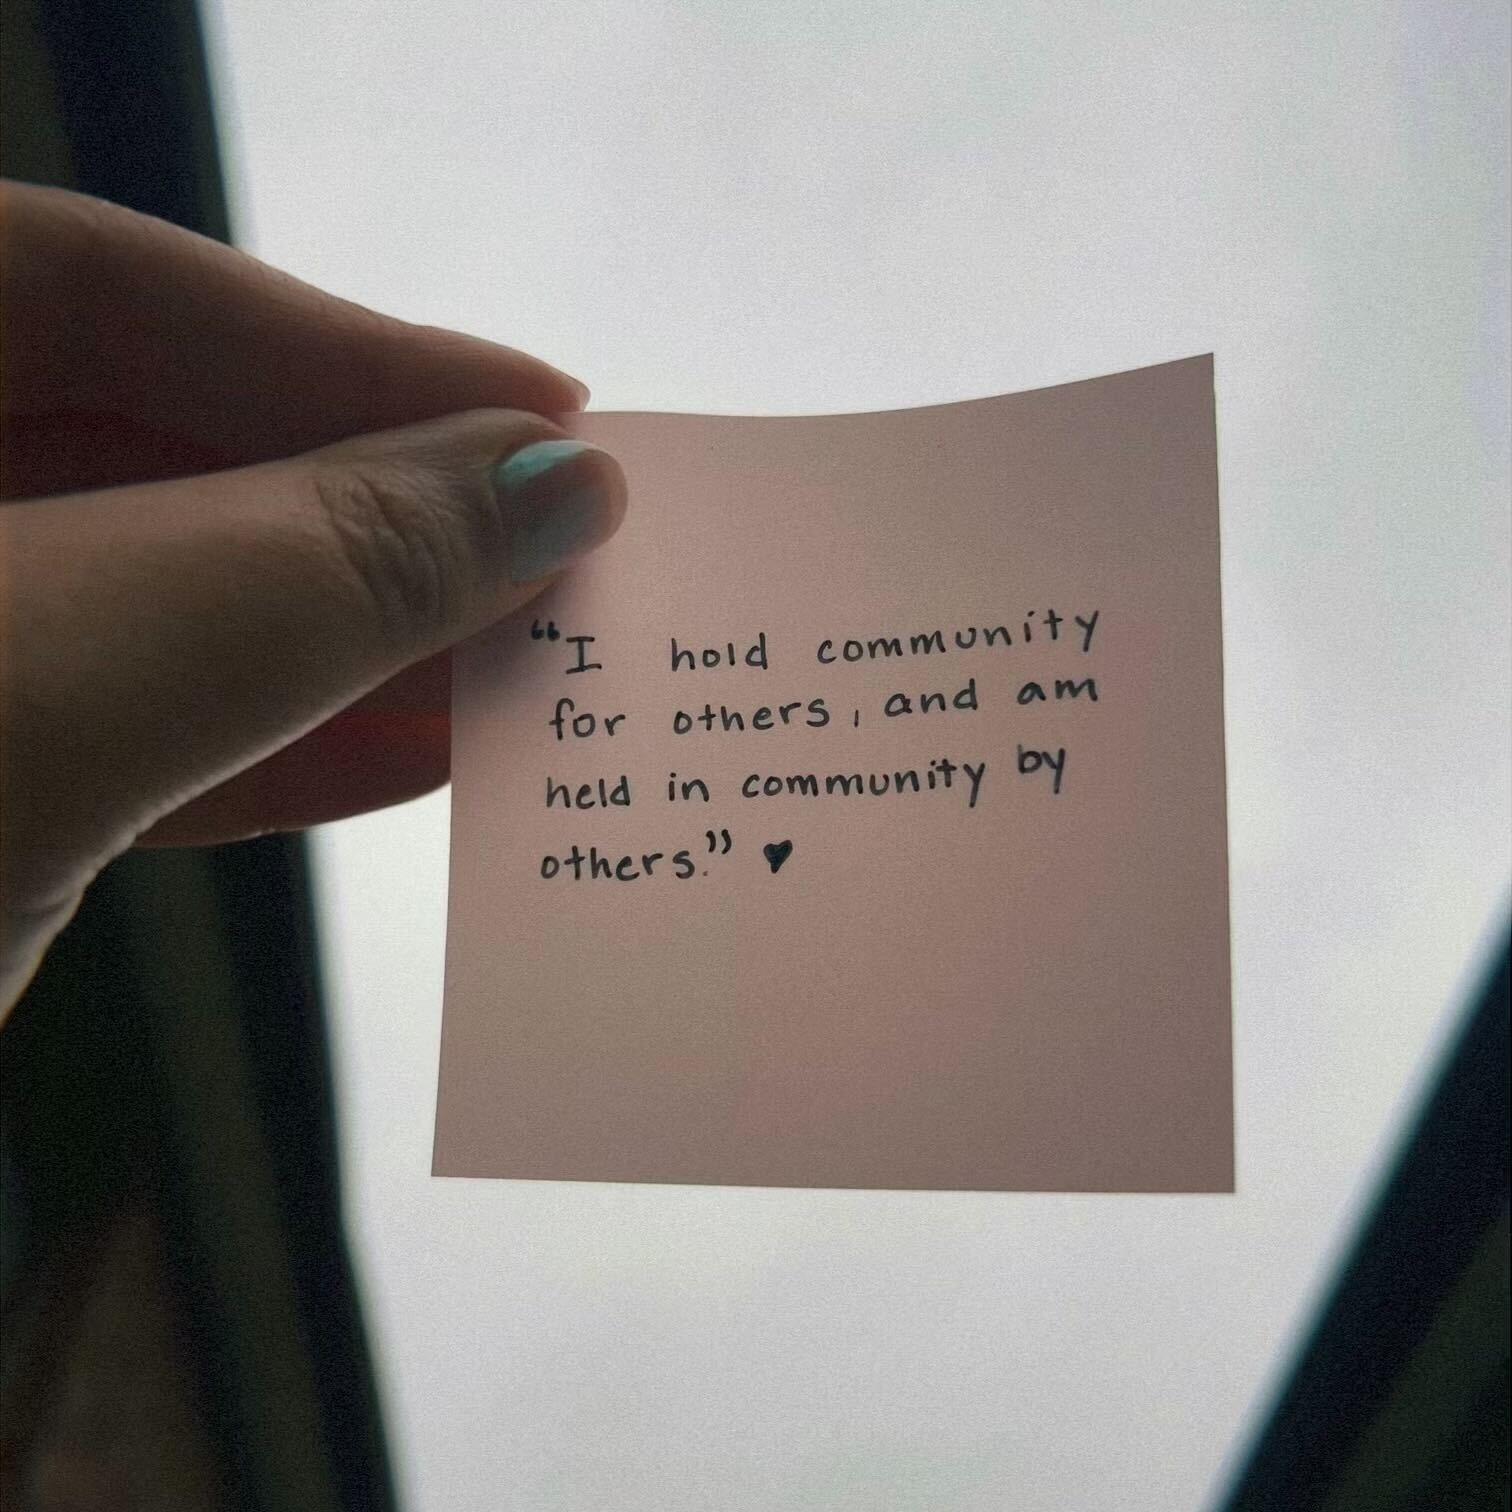 A sticky note being held up to the sky, reading "I hold community for others, and am held in community by others".